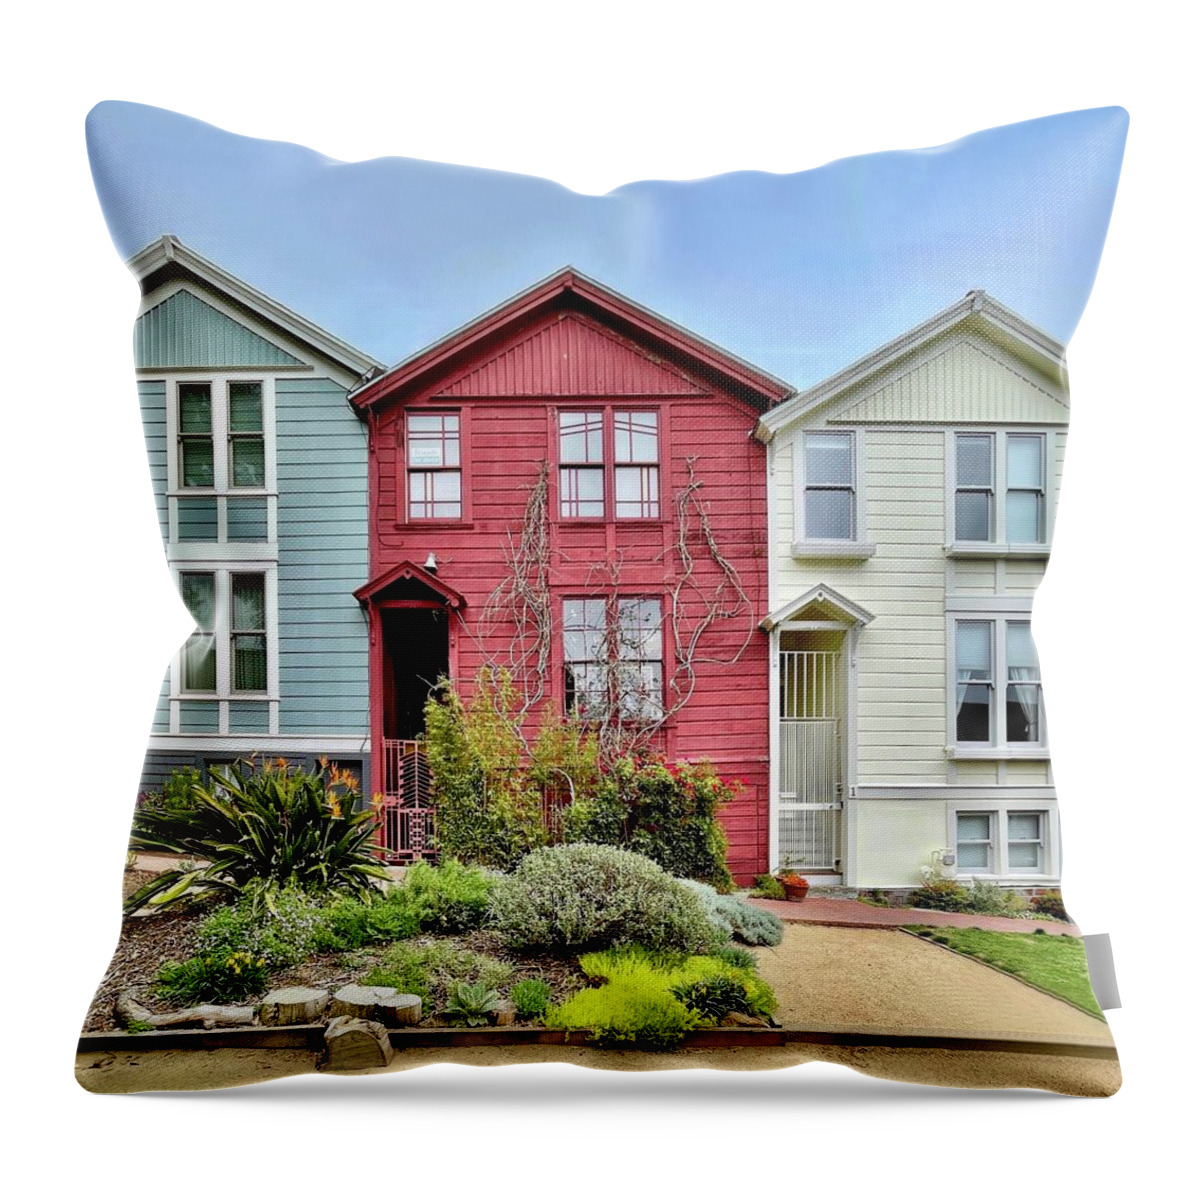  Throw Pillow featuring the photograph House Trio by Julie Gebhardt